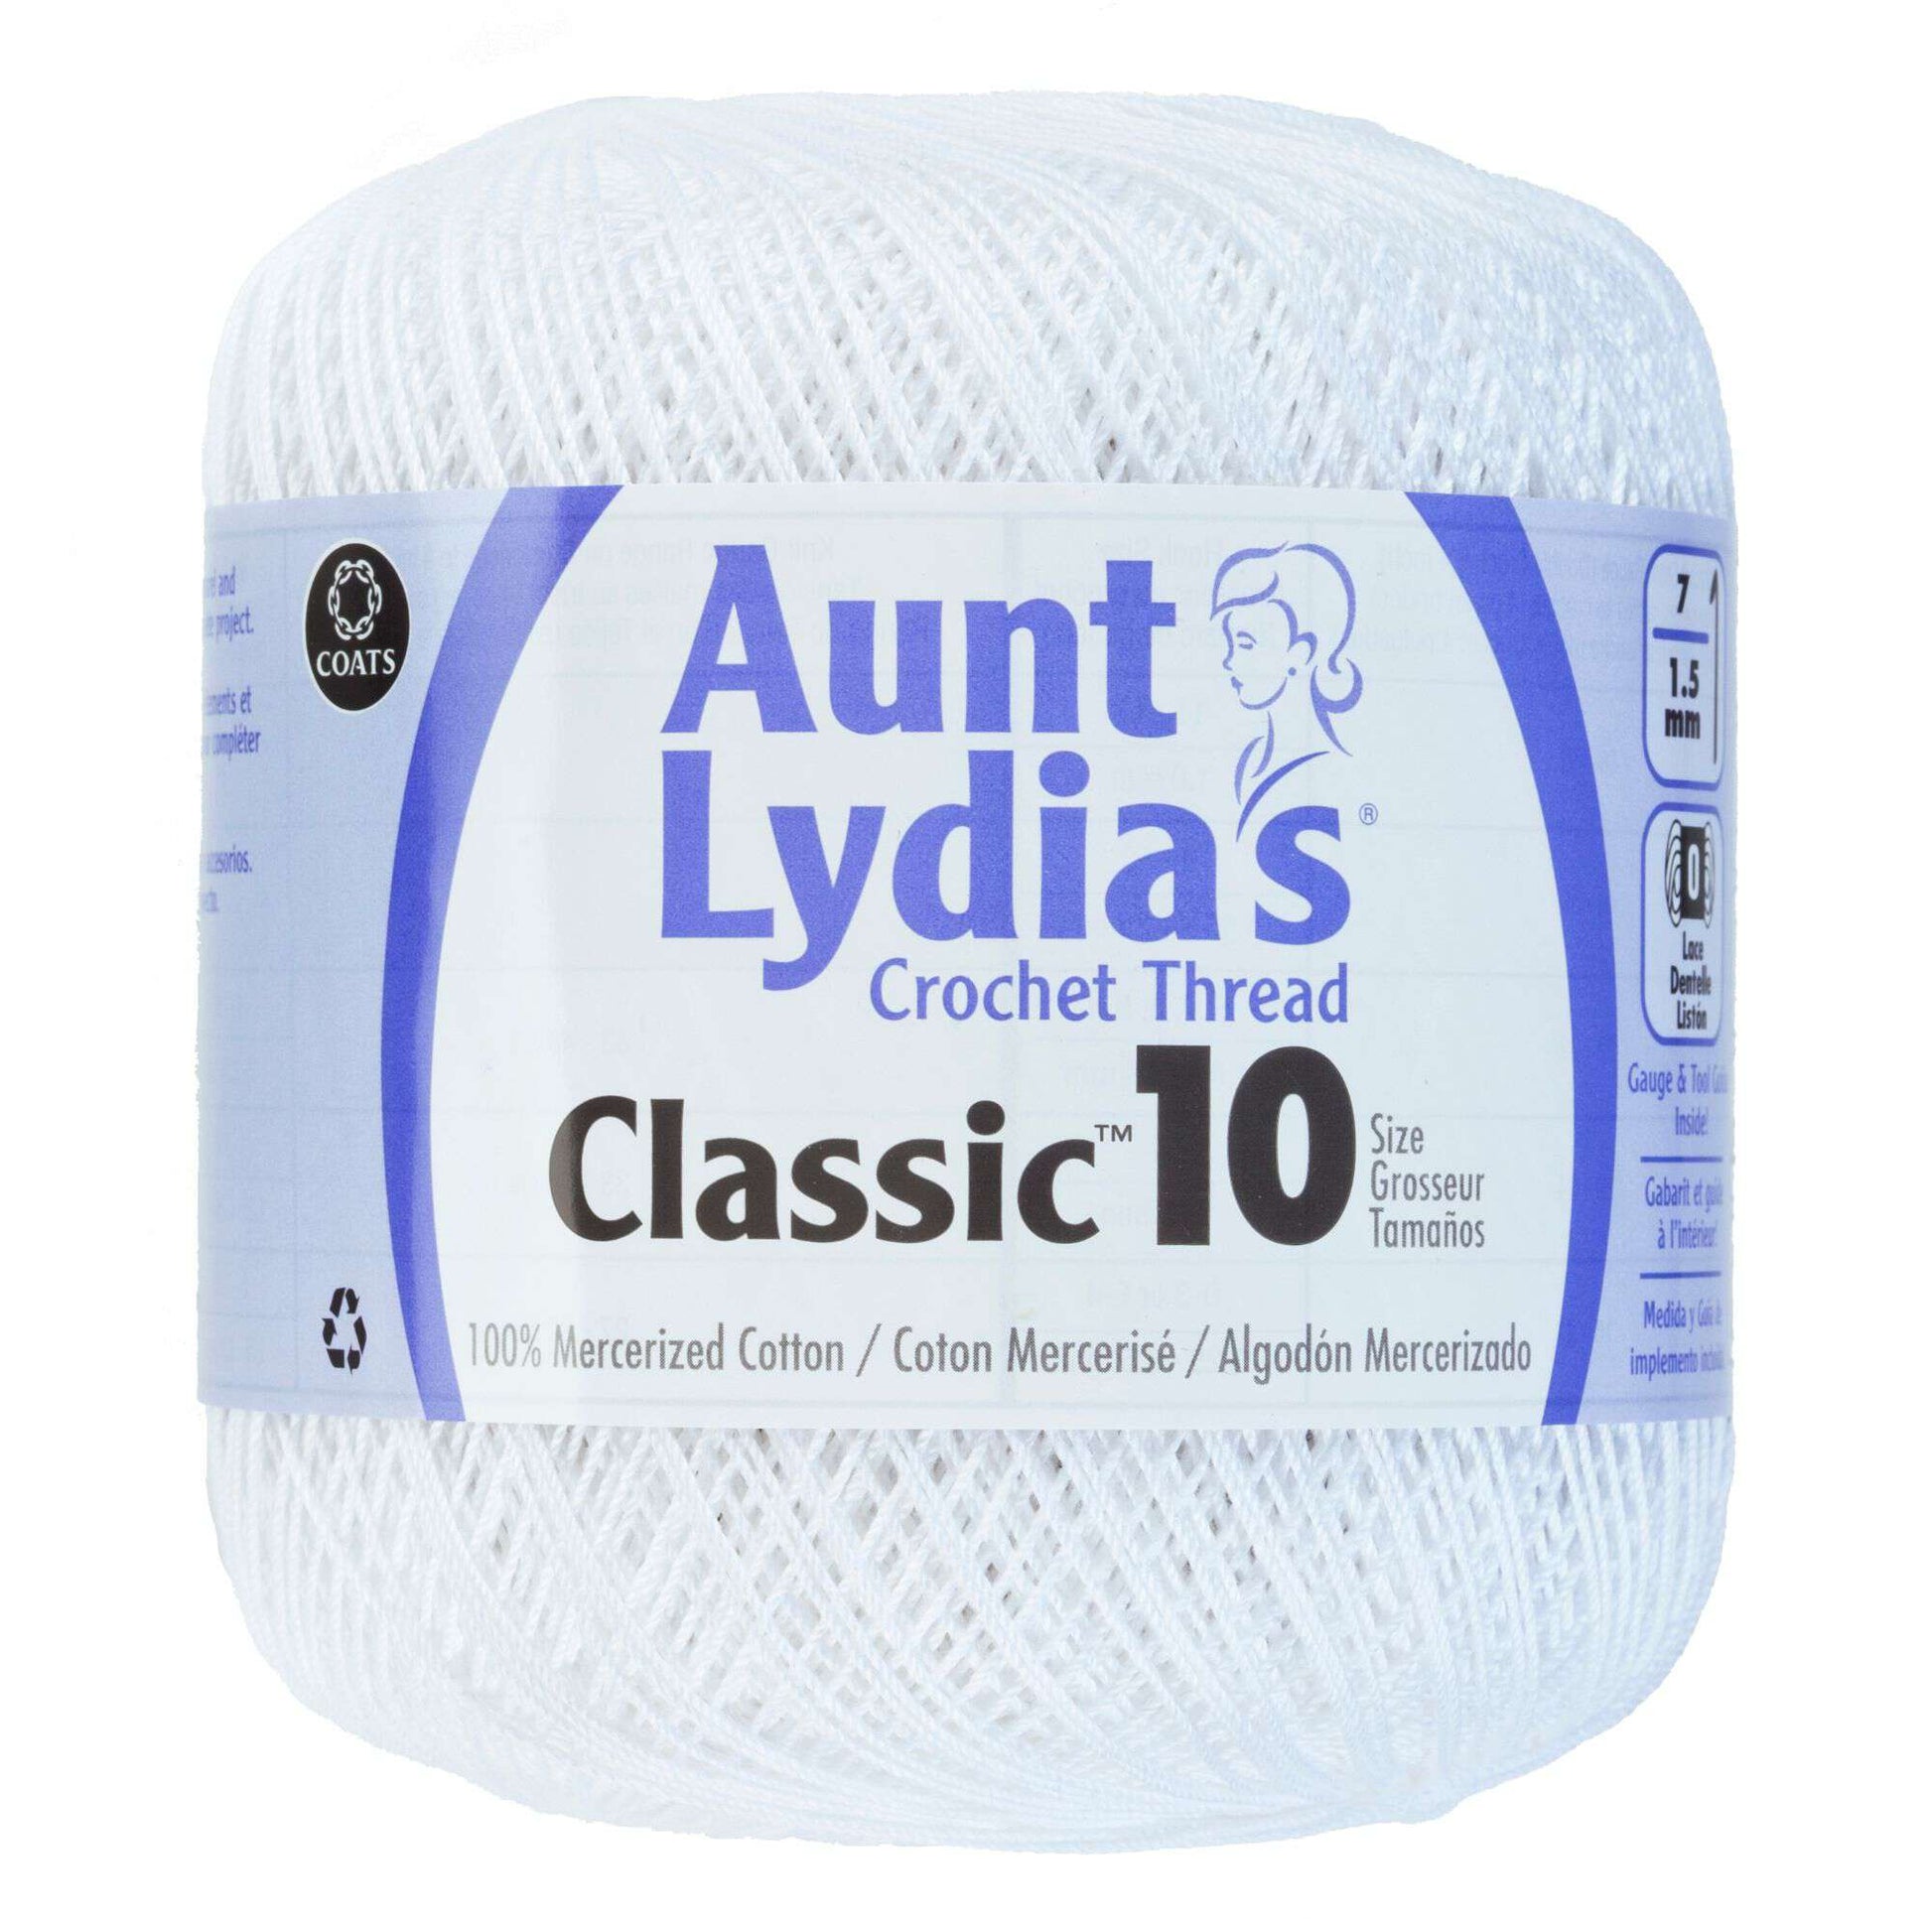 Aunt Lydia's Crochet Thread - Size 10 - French Rose (2-Pack)